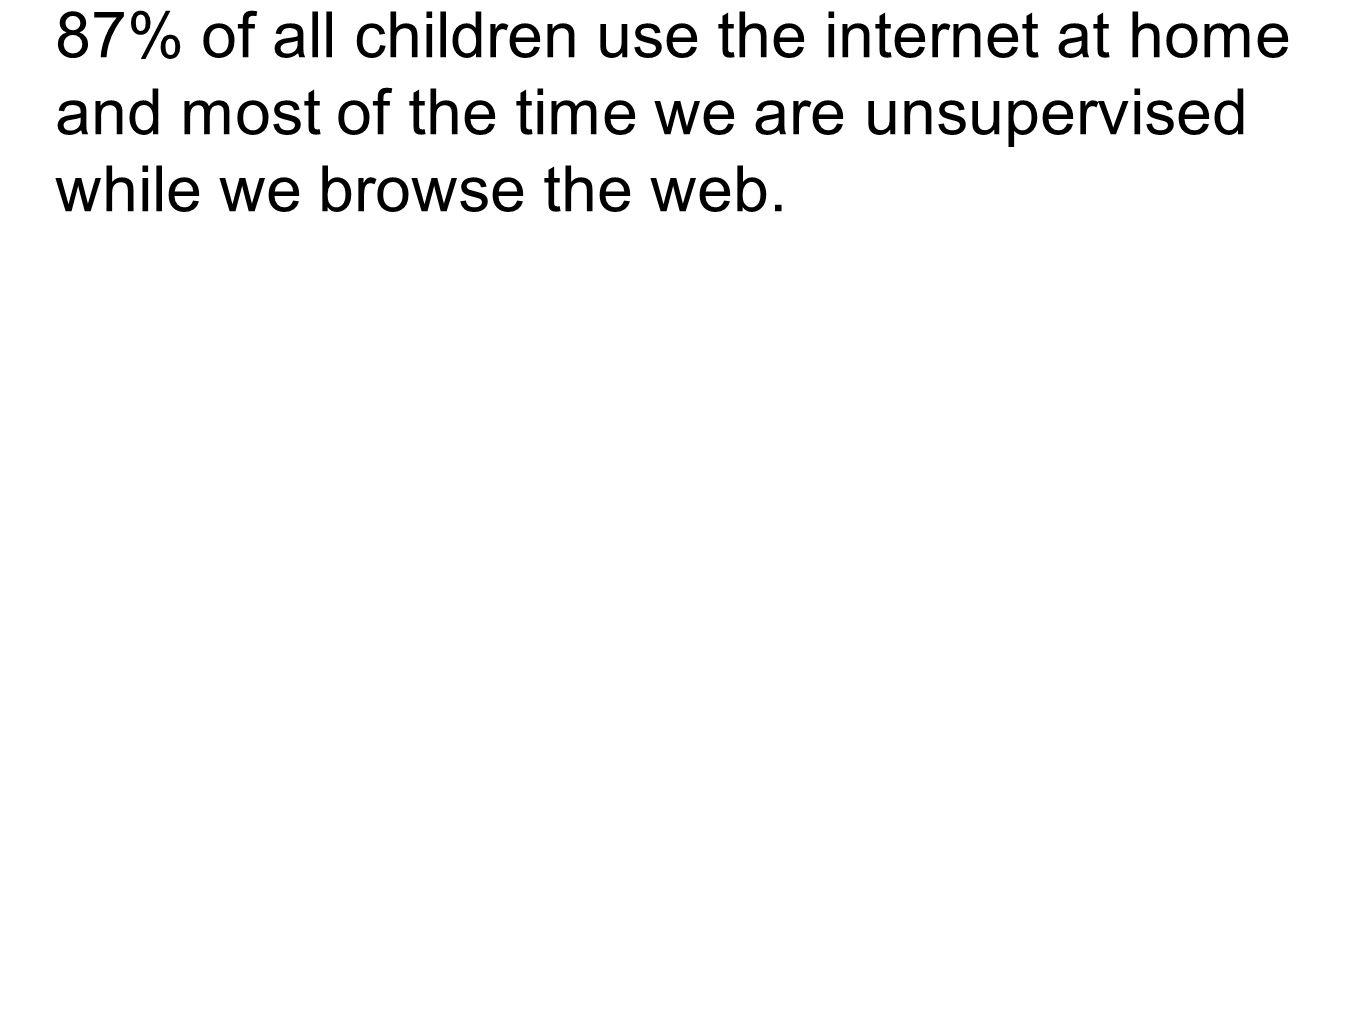 87% of all children use the internet at home and most of the time we are unsupervised while we browse the web.